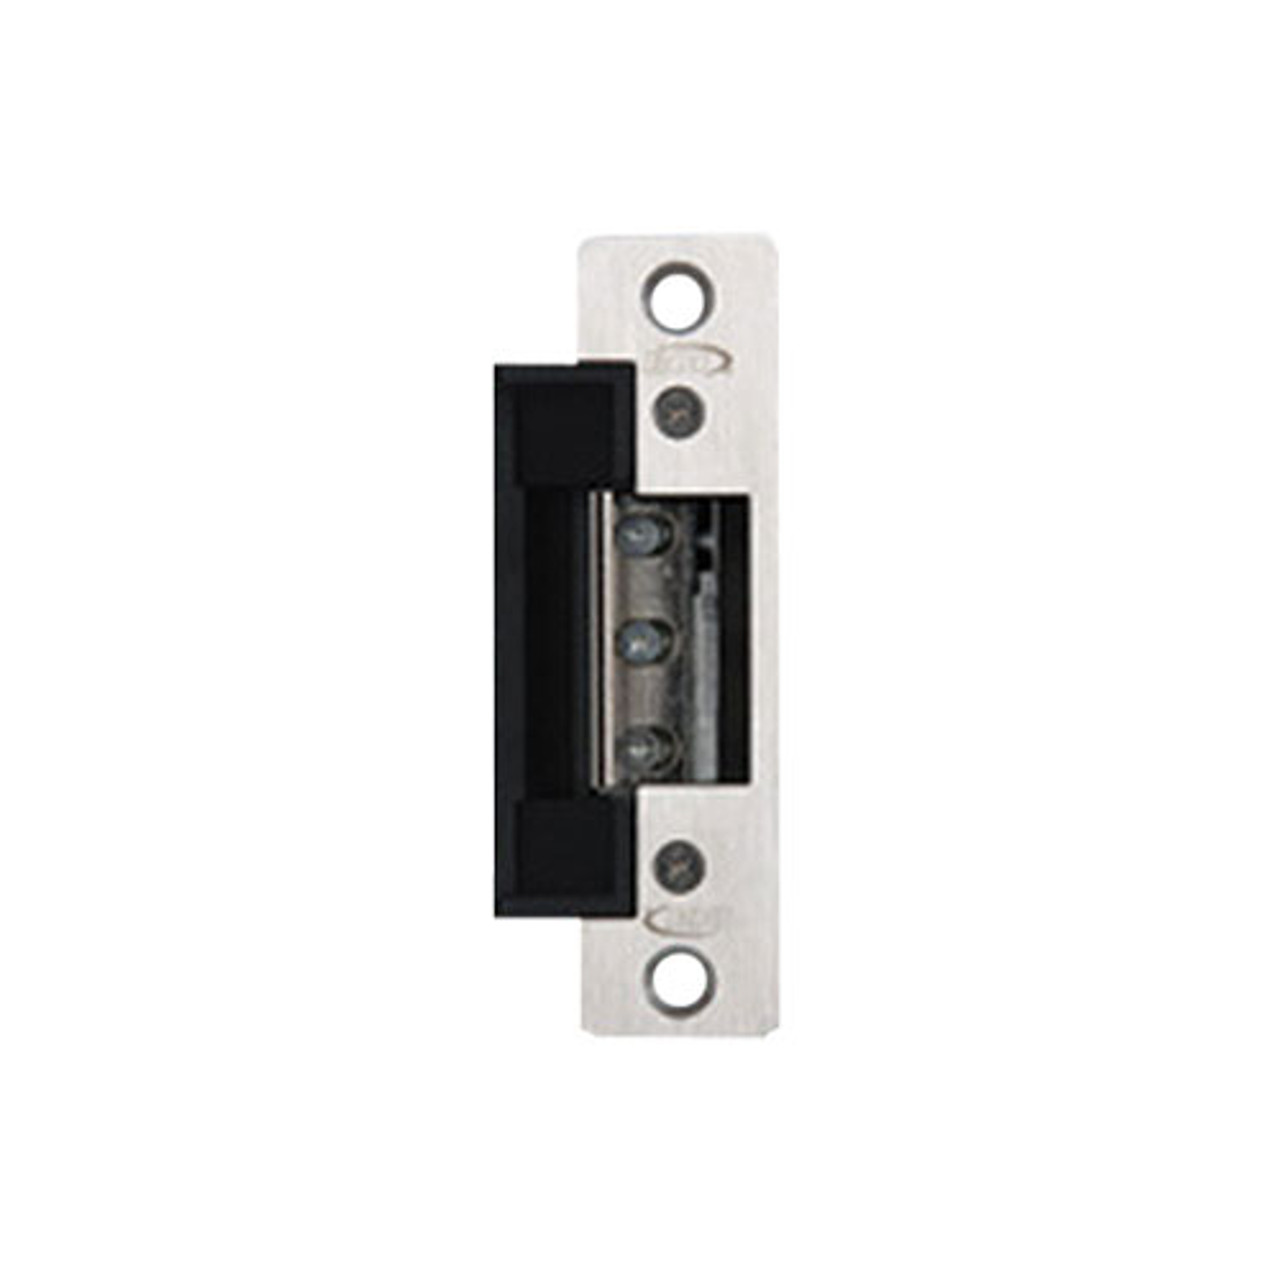 7304-06-32D RCI 7 Series Adjustable Electric Strike for ANSI Centerline Latch Entry in Brushed Stainless Steel Finish